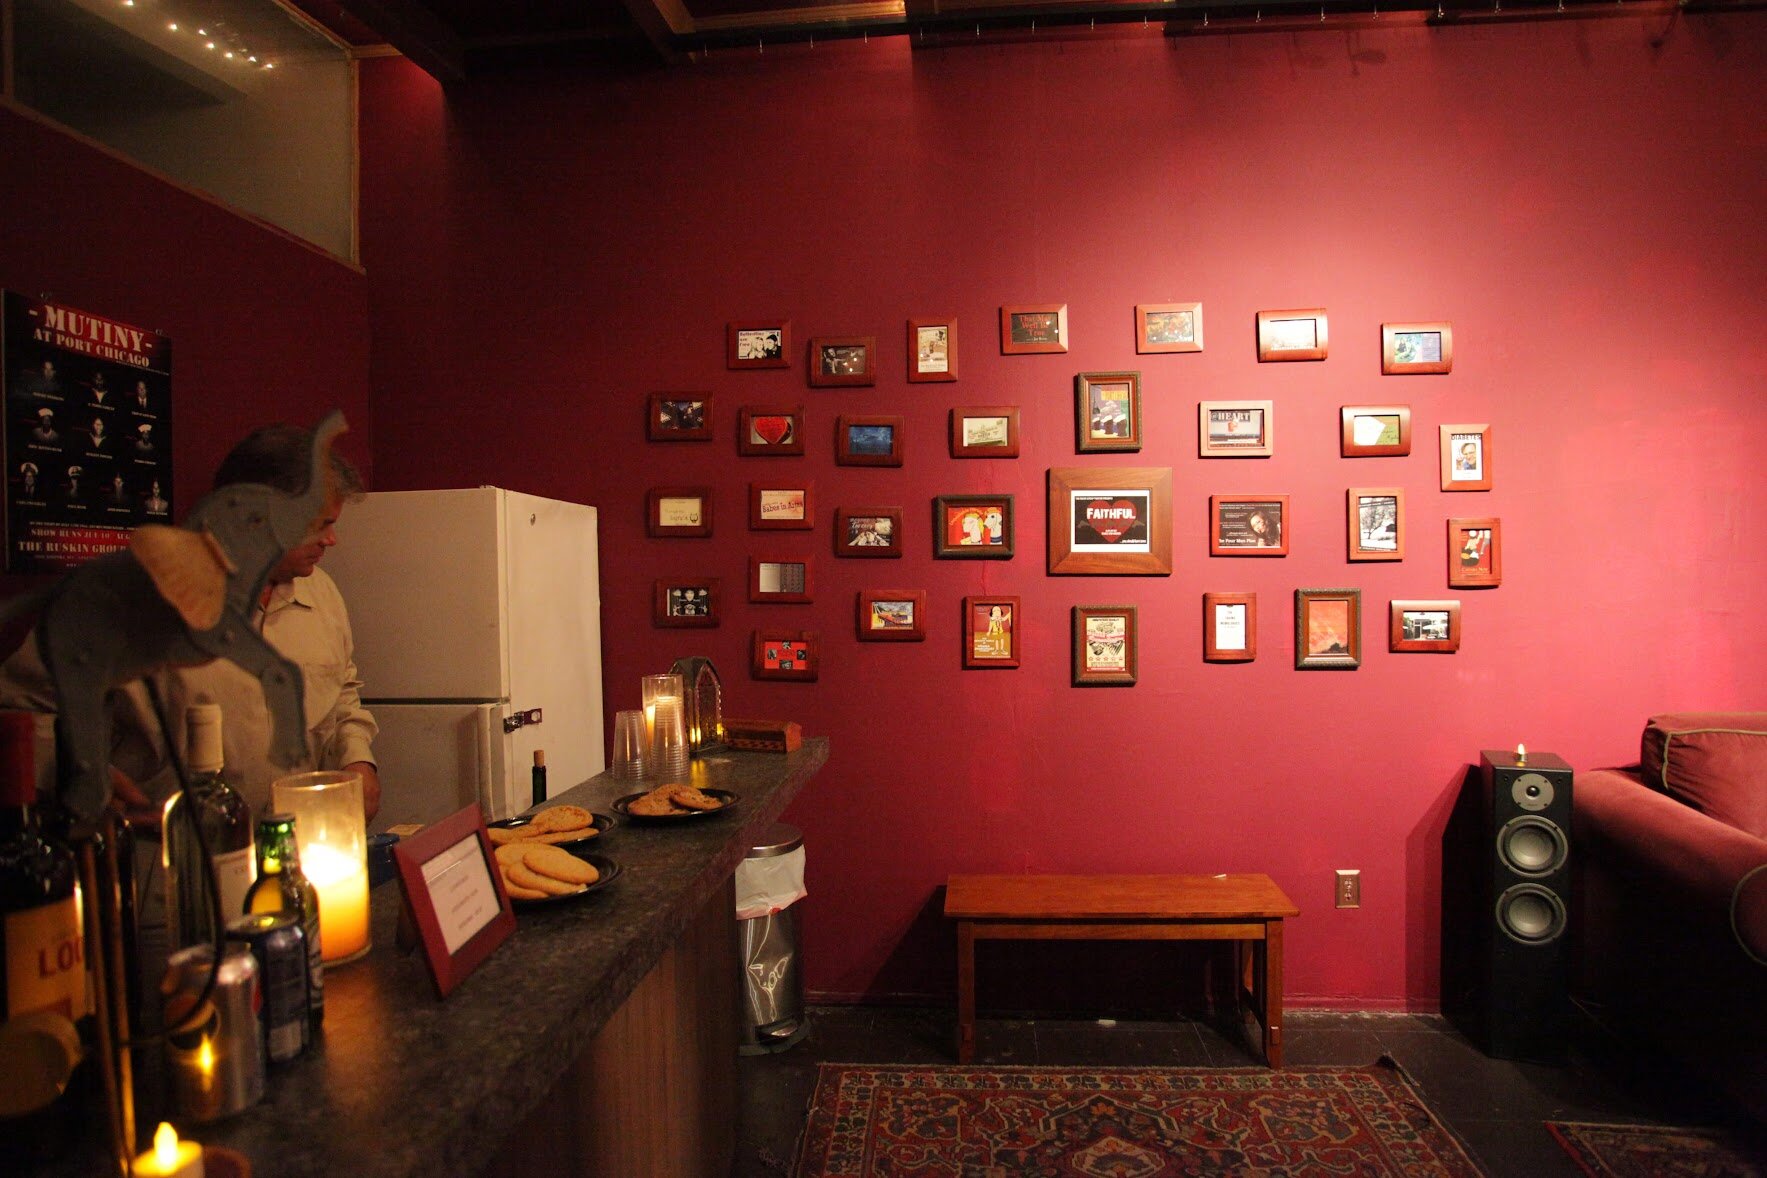 A Burgundy wall with playbills and a bar